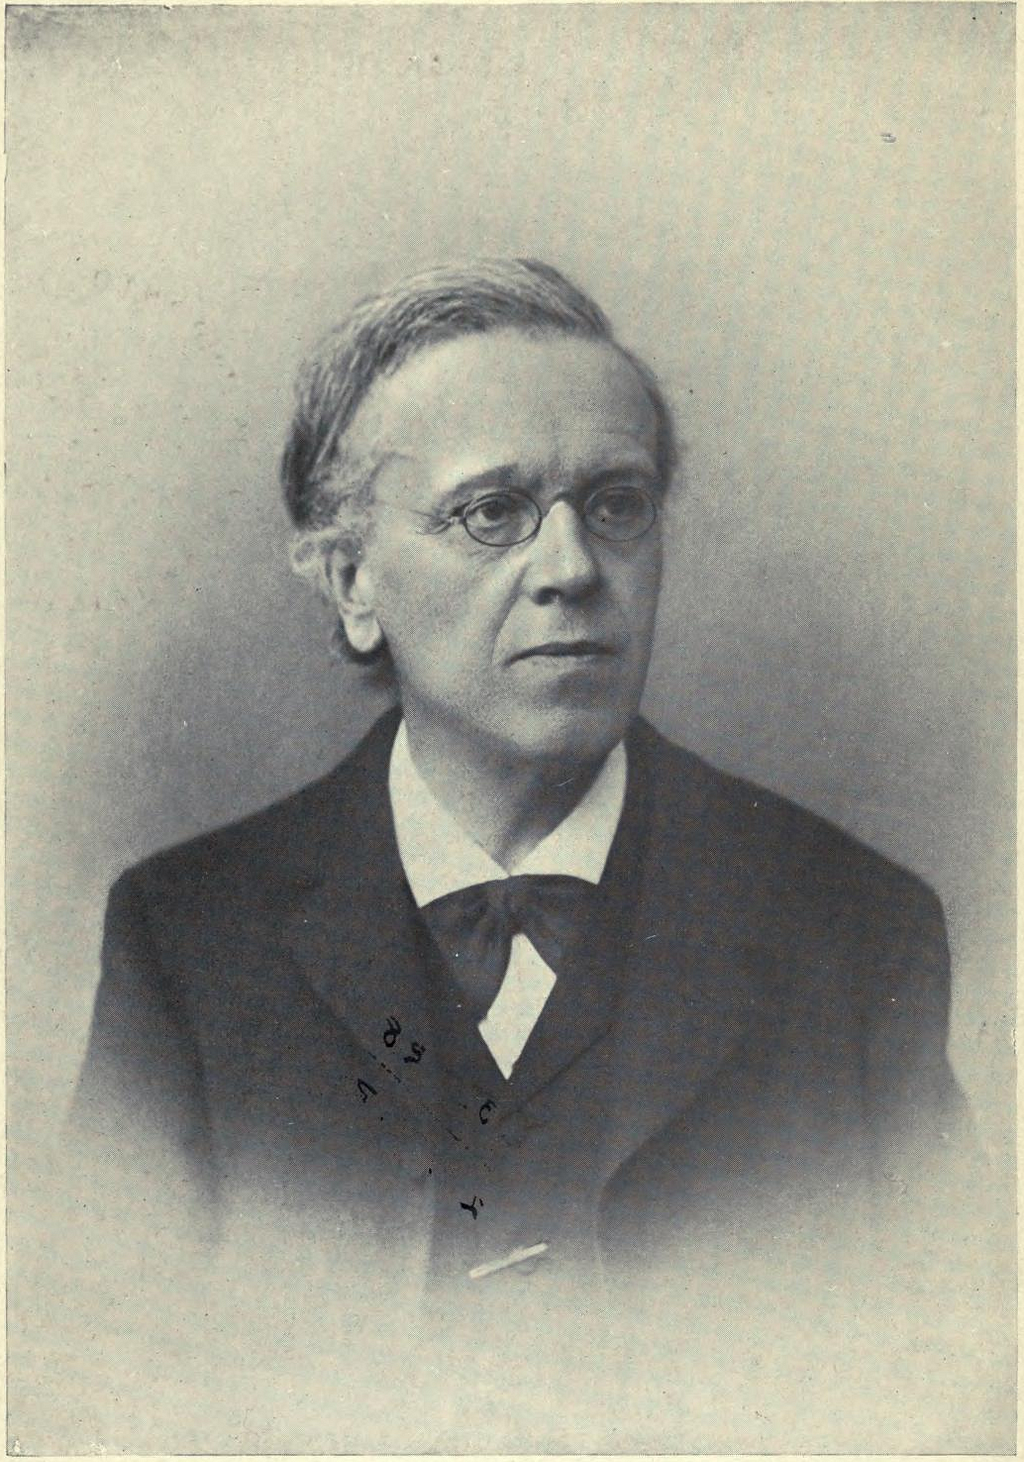 Black and white photograph of Franz Overbeck, in a suit, wearing thing rimmed glasses. Photo by August Höflinger.